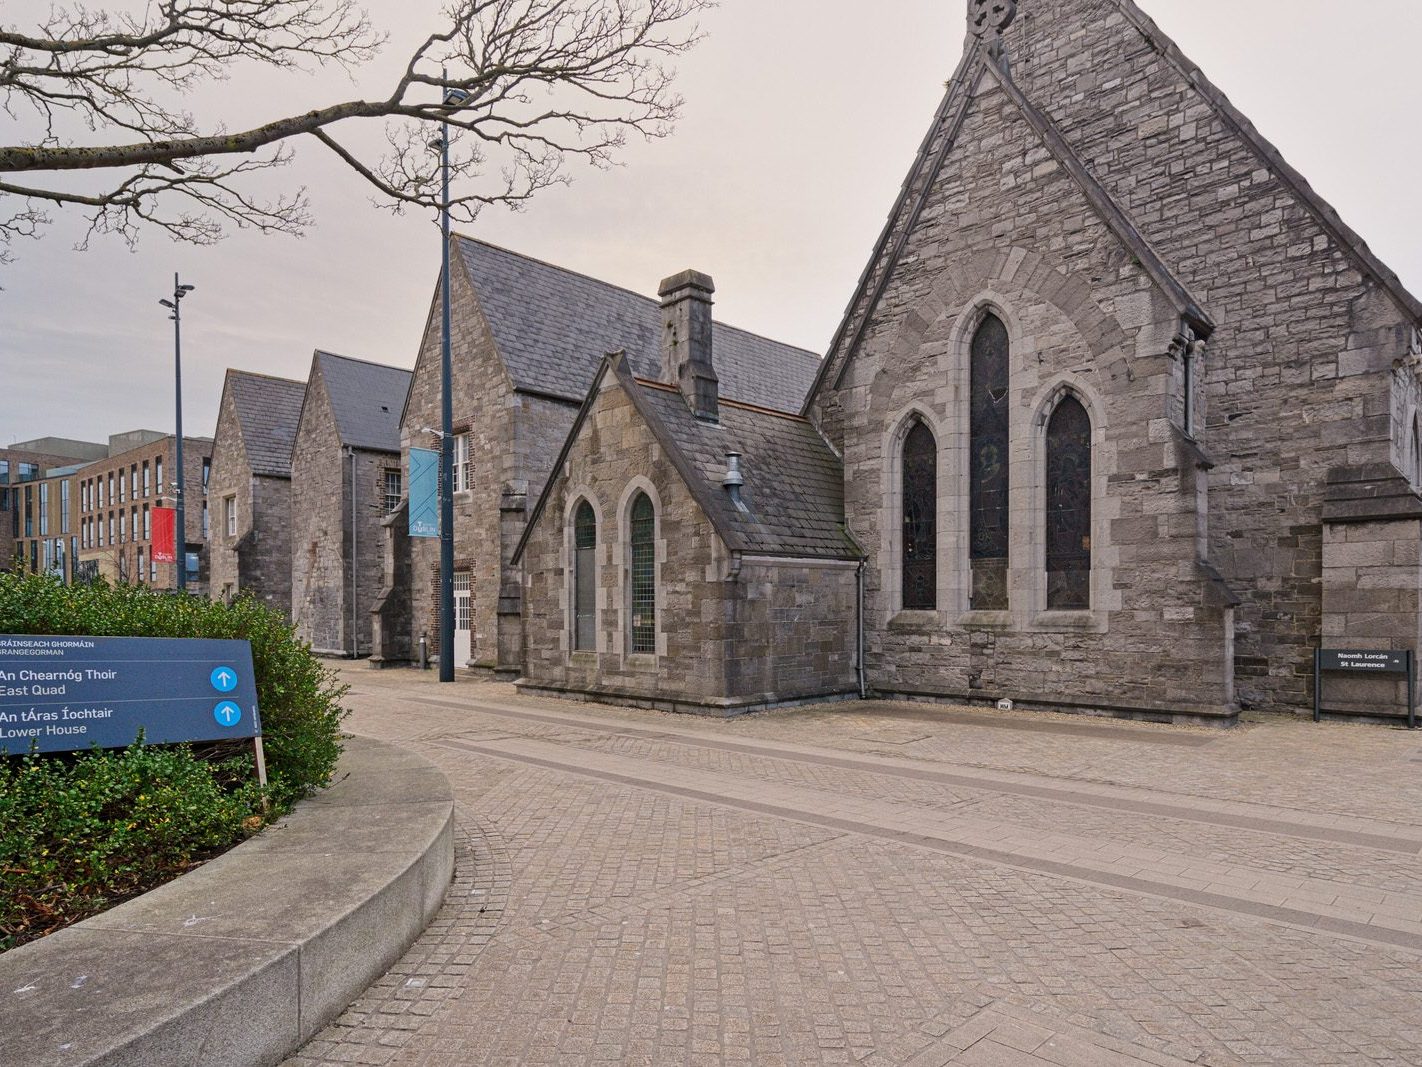 I VISITED THE GRANGEGORMAN UNIVERSITY CAMPUS [THERE WAS NO SIGN OF CHRISTMAS CELEBRATIONS THERE]-226046-1